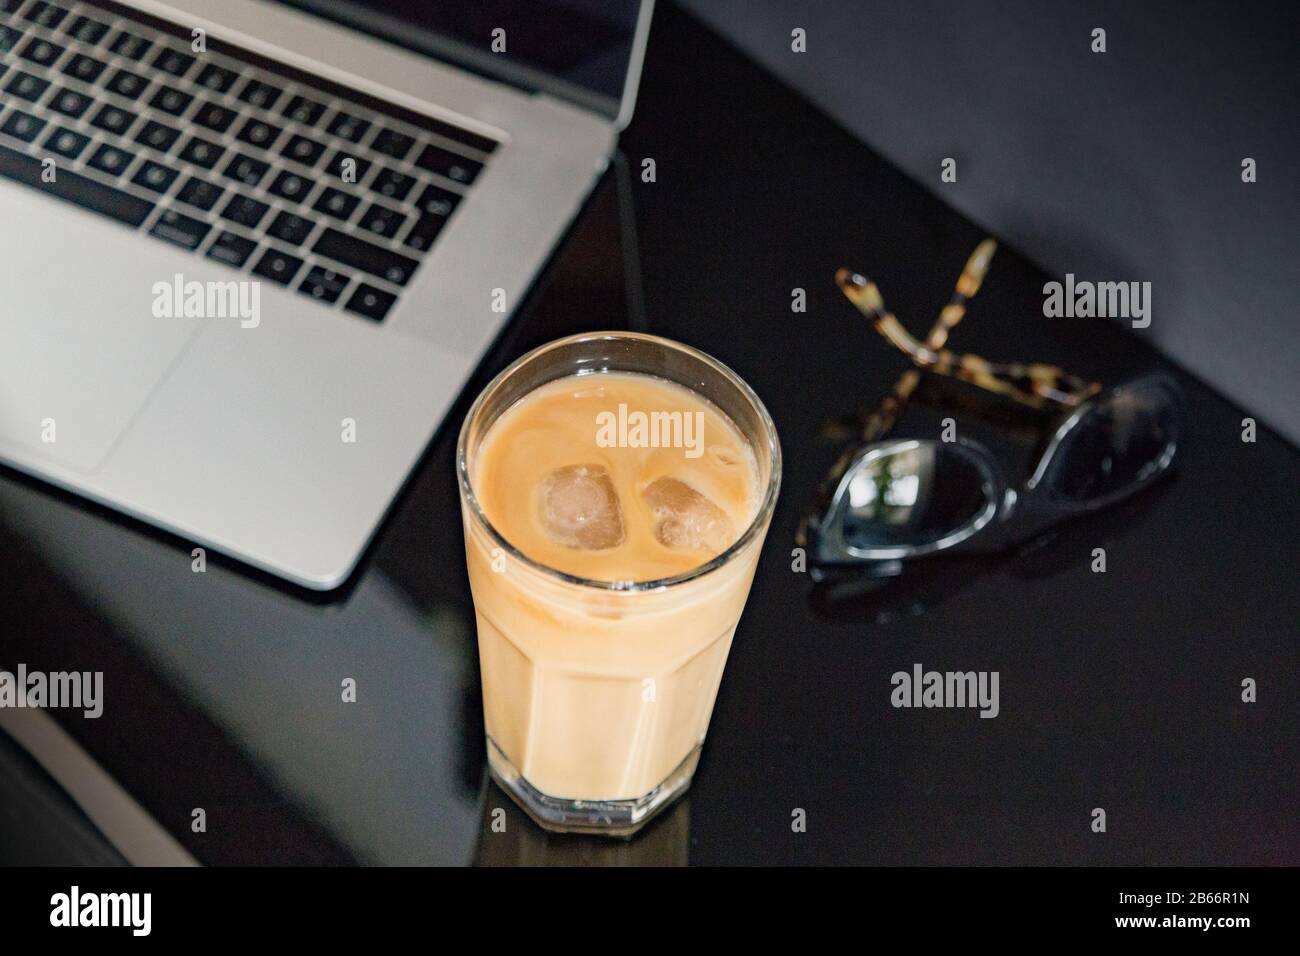 Refreshing iced coffee in modern work place environment with sunglasses and laptop/notebook. Still life arrangement, lifestyle, business. Stock Photo